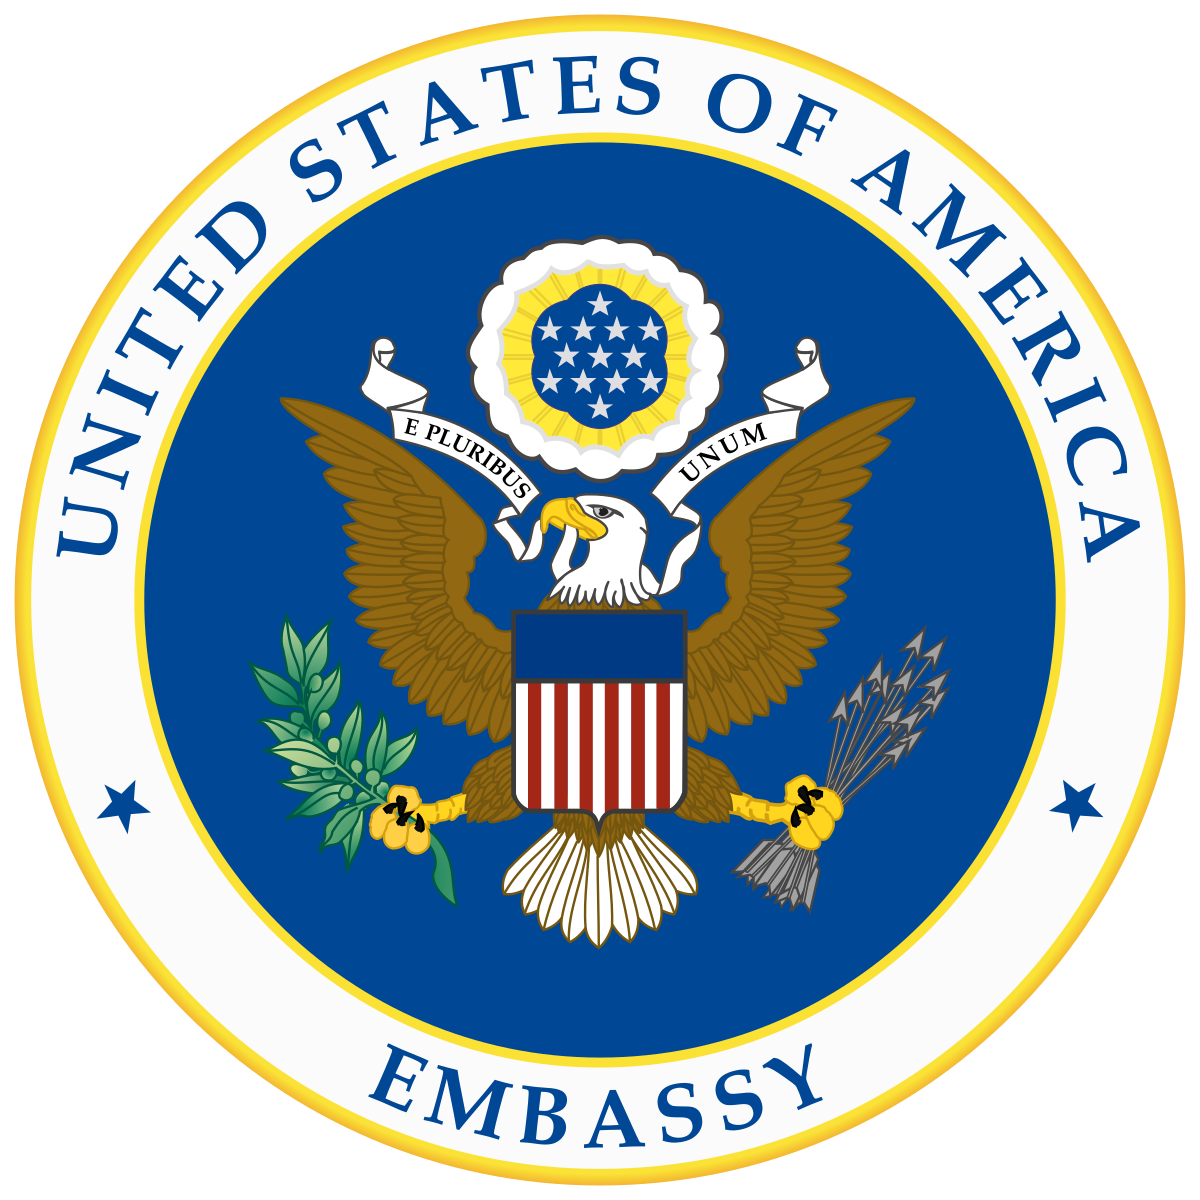 1200px-Seal_of_an_Embassy_of_the_United_States_of_America.svg.png